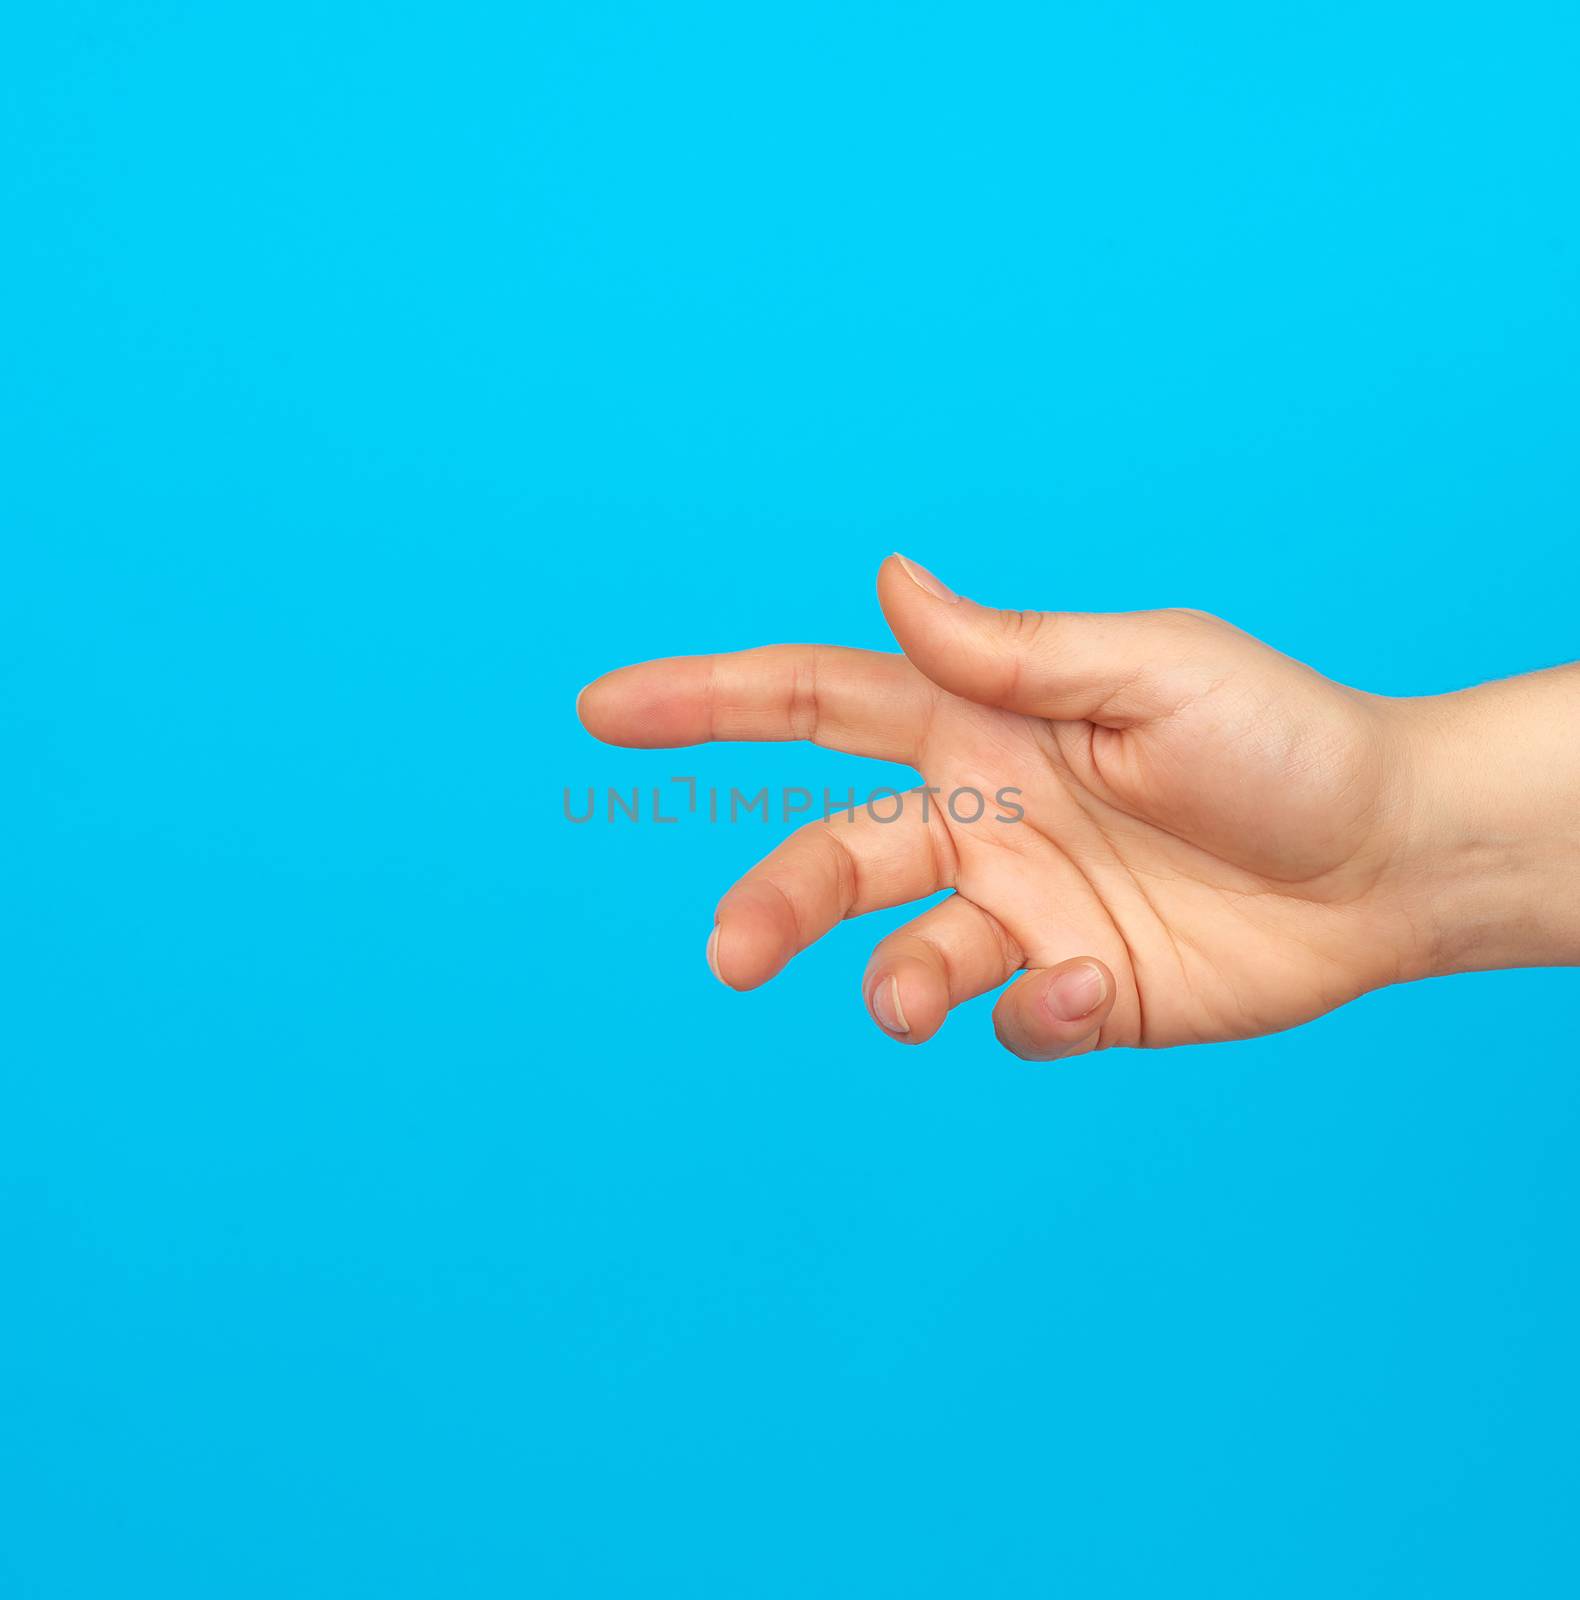 hand reaches to the side, gesture that shows holding the item in the palm, blue background